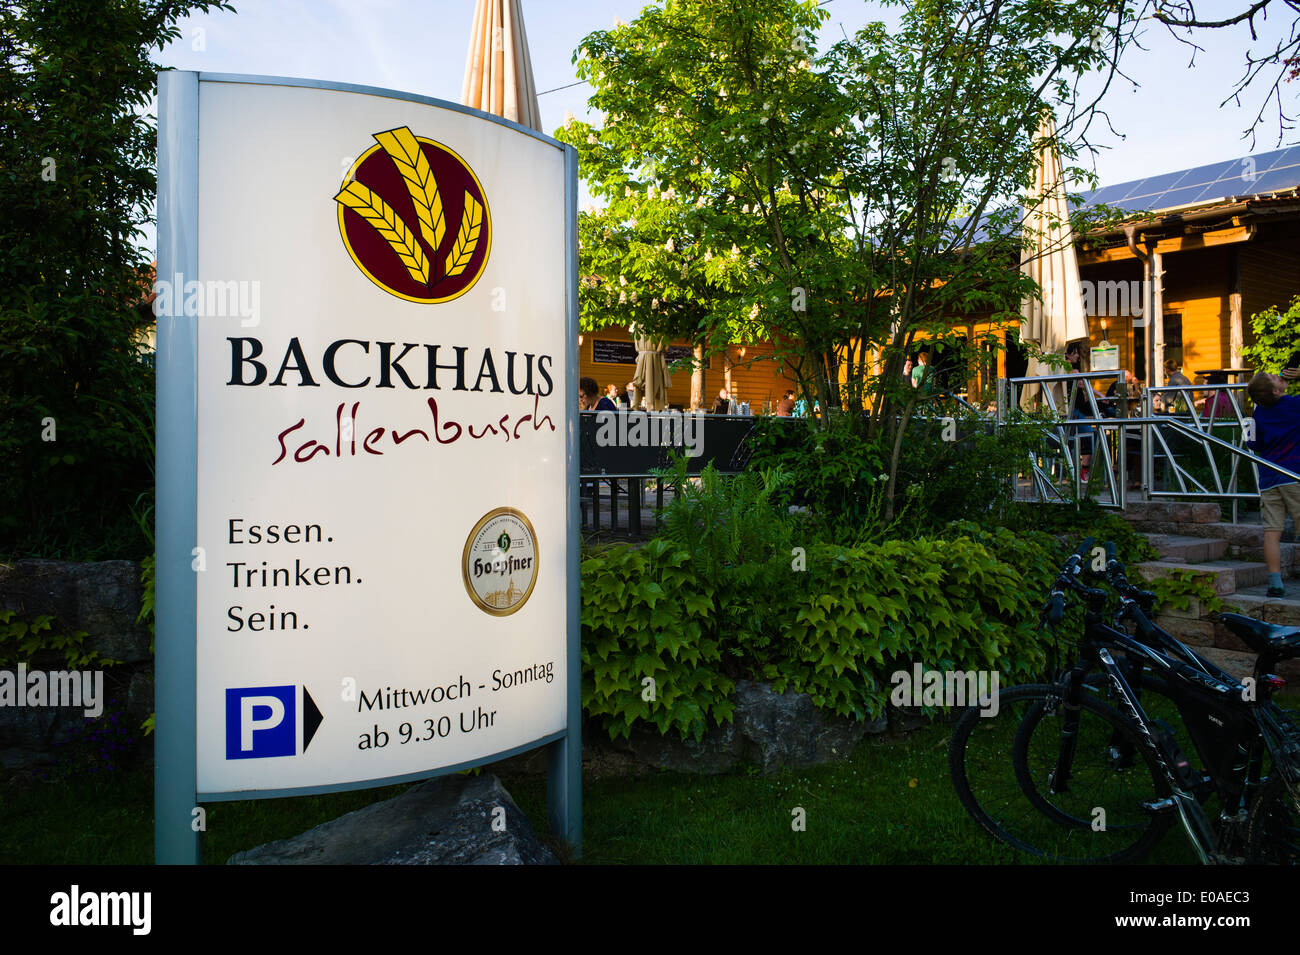 Backhaus High Resolution Stock Photography and Images - Alamy